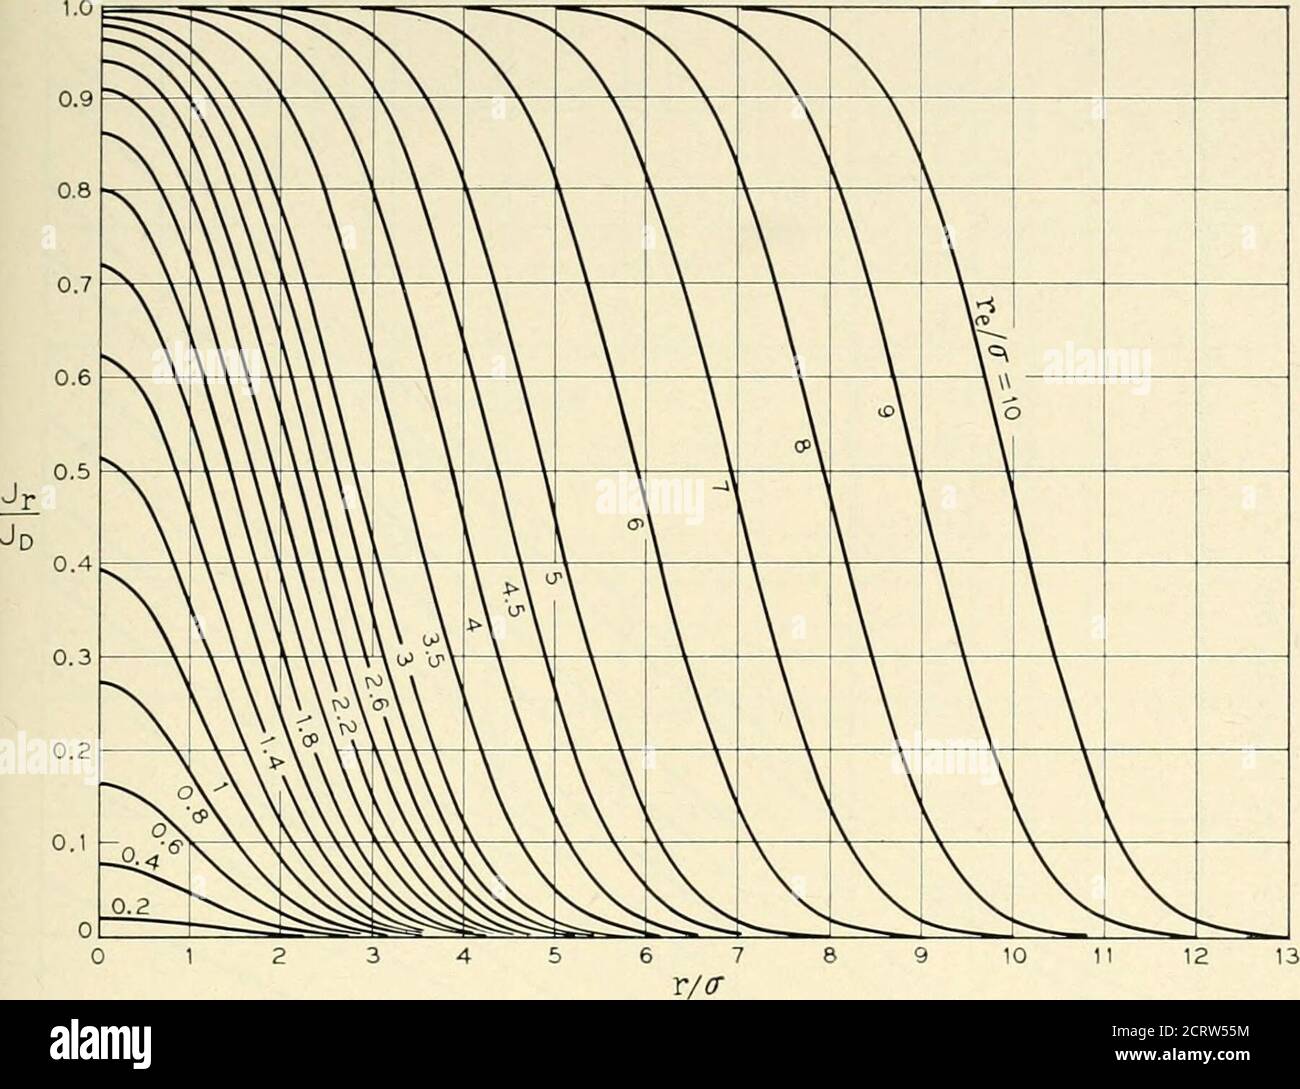 . The Bell System technical journal . ^dV^]^Fr-j- (X a t  BEAM FORMATION WITH ELECTRON GUNS 395. Fig. 6 — Curves showing the current density variation with radius in a beamI which has been dispersed by thermal velocities. Here r« is the nominal beam radius,I r is the radius variable, and &lt;t is the standard deviation defined in equation 17. A family of curves with this ratio, Fr, as parameter has been reproduced: from the Hines-Cutler paper and appears here as Fig. 7. Using this no-tation, (25) becomes dV ^ Vr,/{2V.) j^ Frdi^ 27reo r or d rdz^ jn_ lo Fr^ Fr 27r€0 (27,7a)3/2 J. J. (27) wher Stock Photo